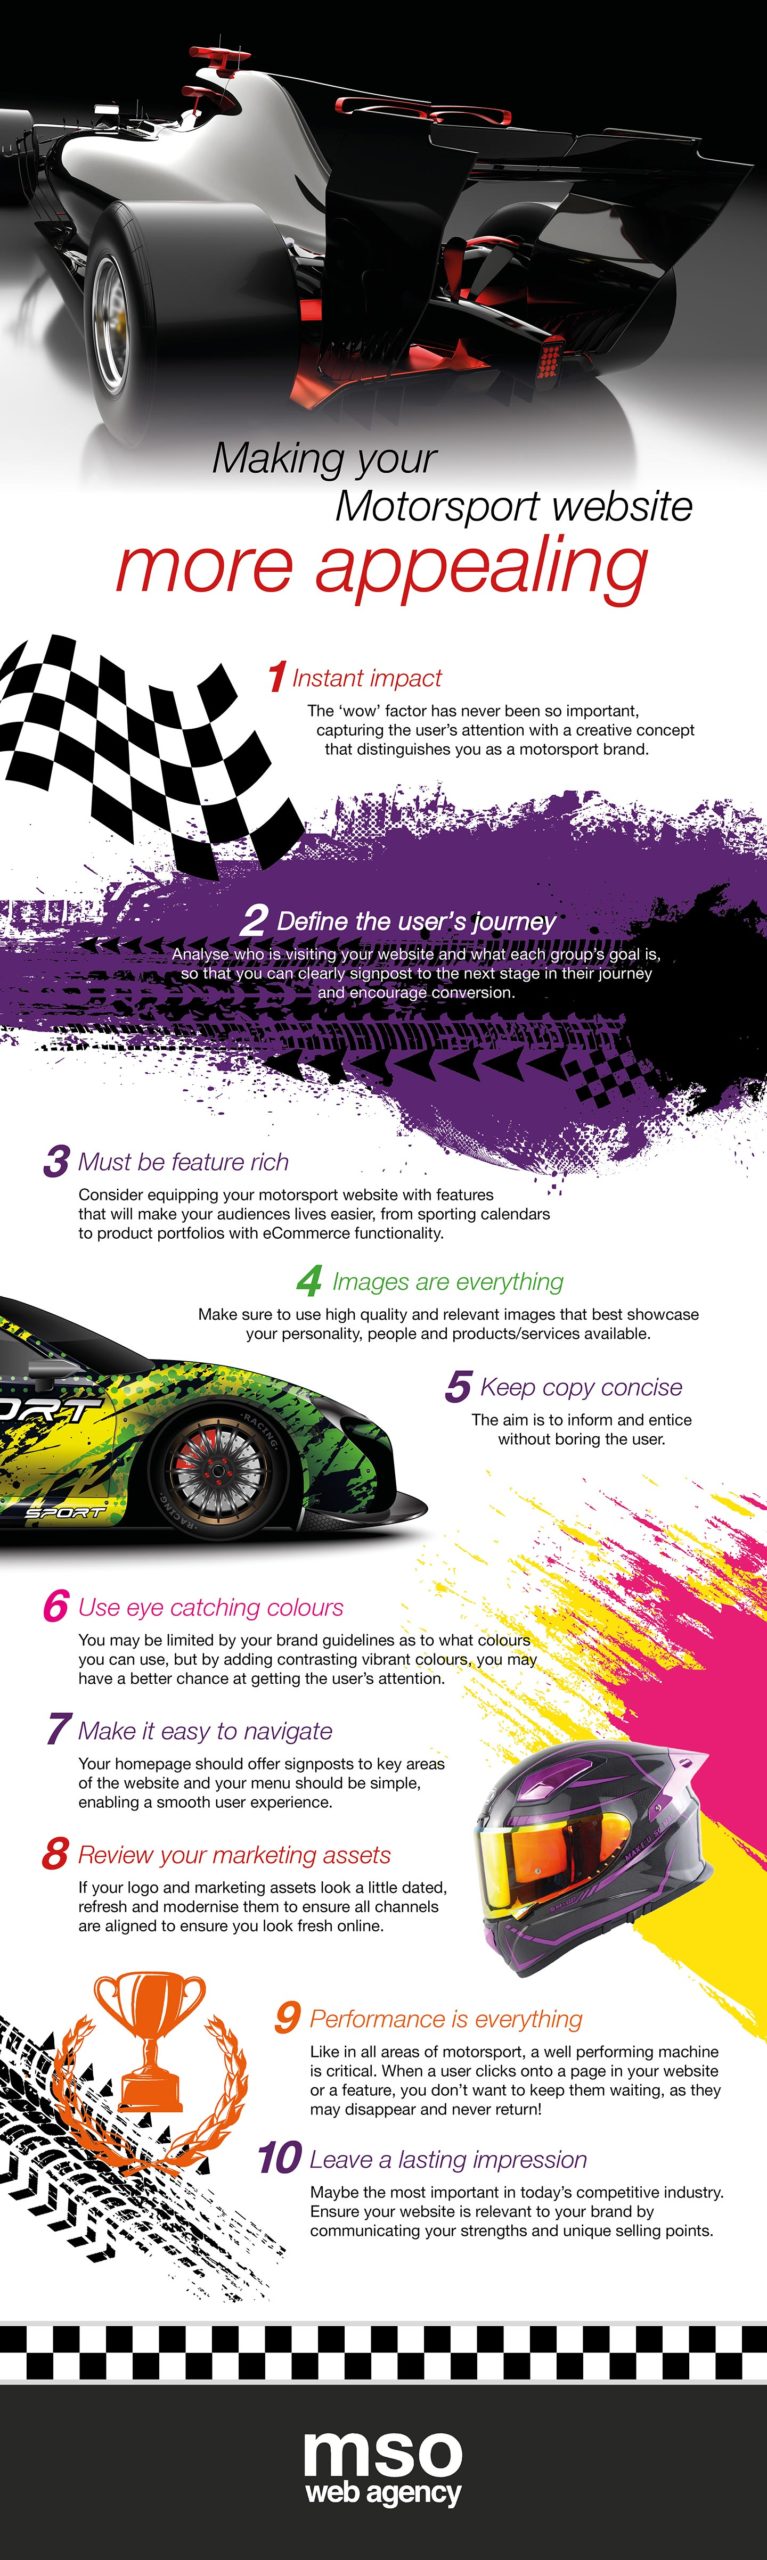 This is an infographic that shares tips on how motorsport companies can make their website more appealing through website design. 